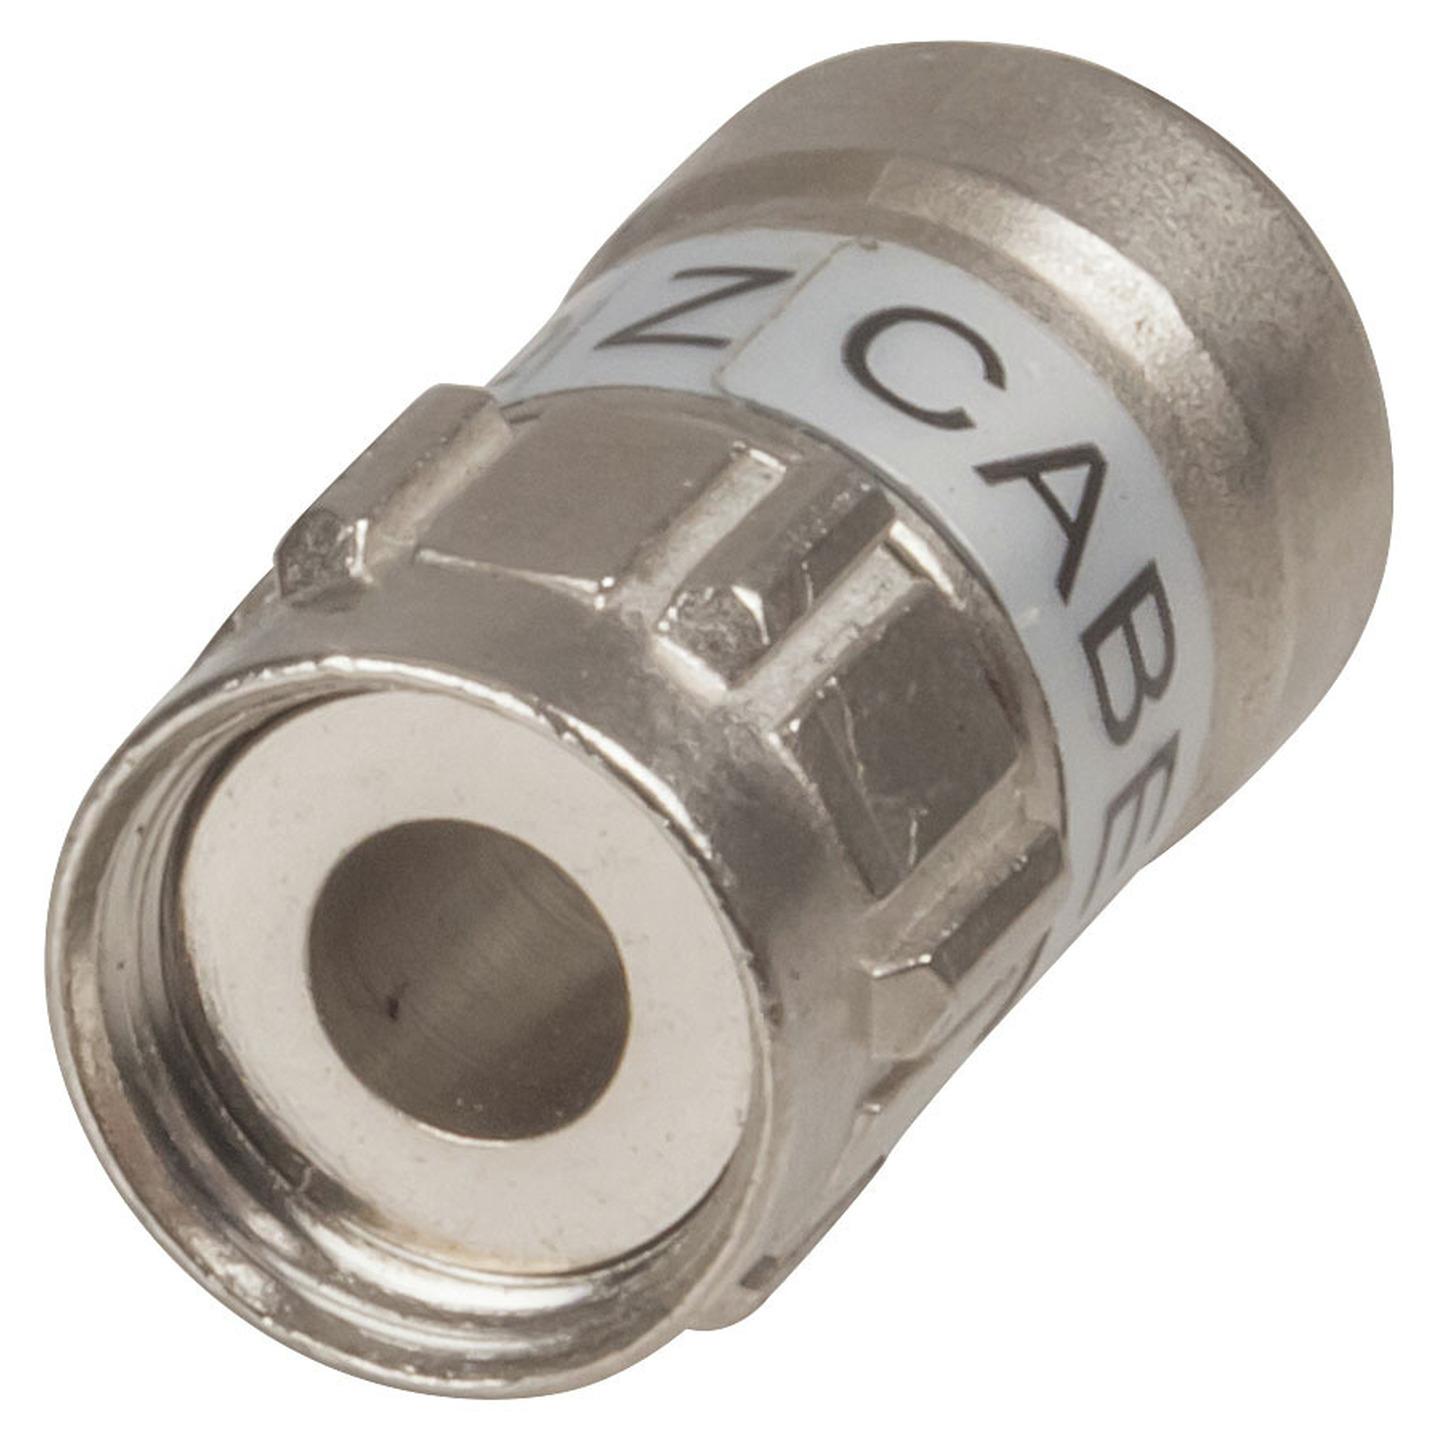 Tool-Less F59 Compression Plug to Suit RG6 Cable